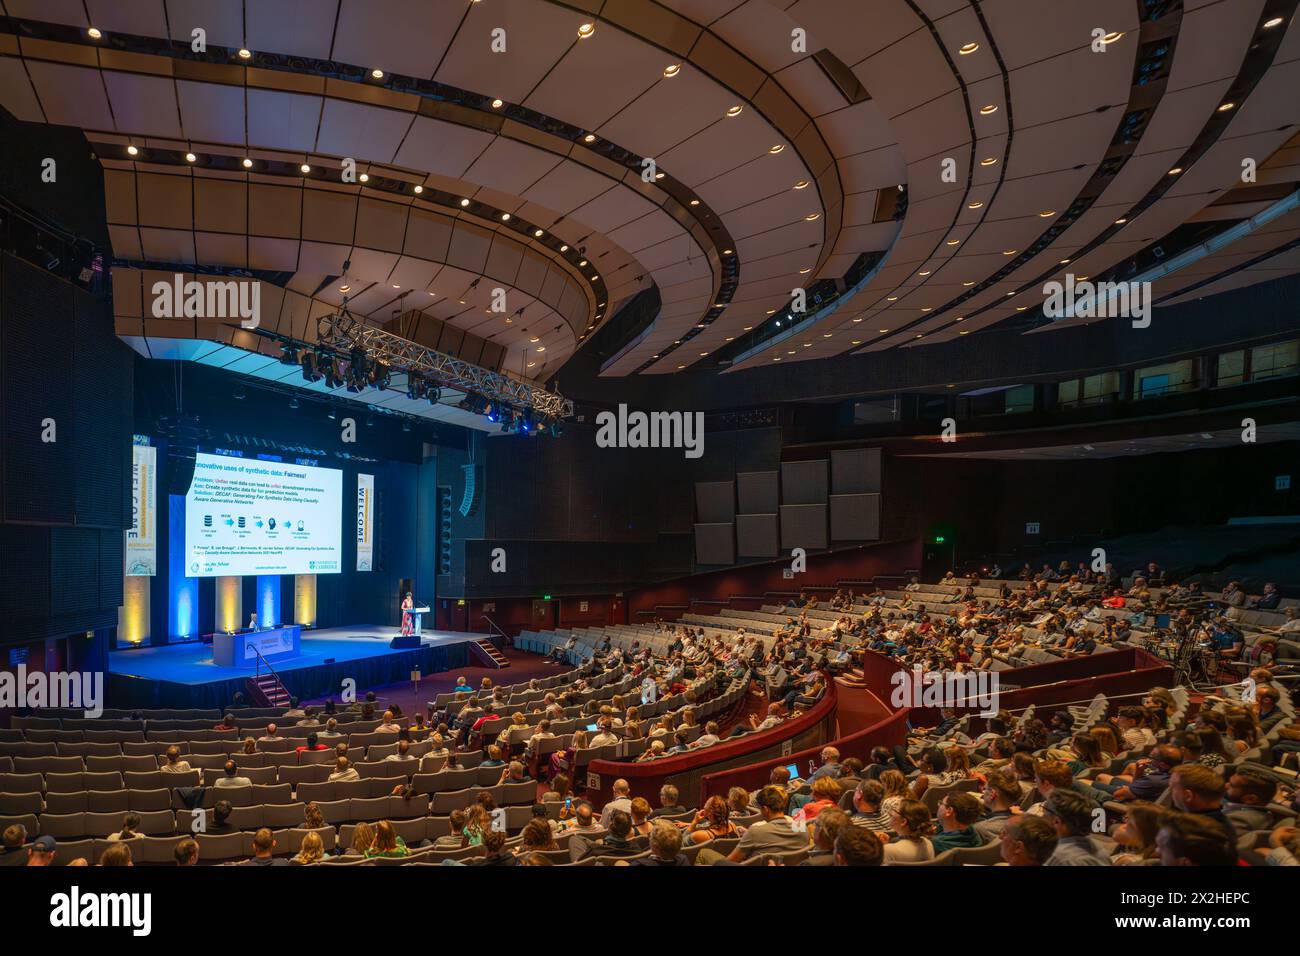 The auditorium of the Harrogate convention centre. Photo date: Wednesday, September 6, 2023. Photo: Richard Gray/Alamy Stock Photo